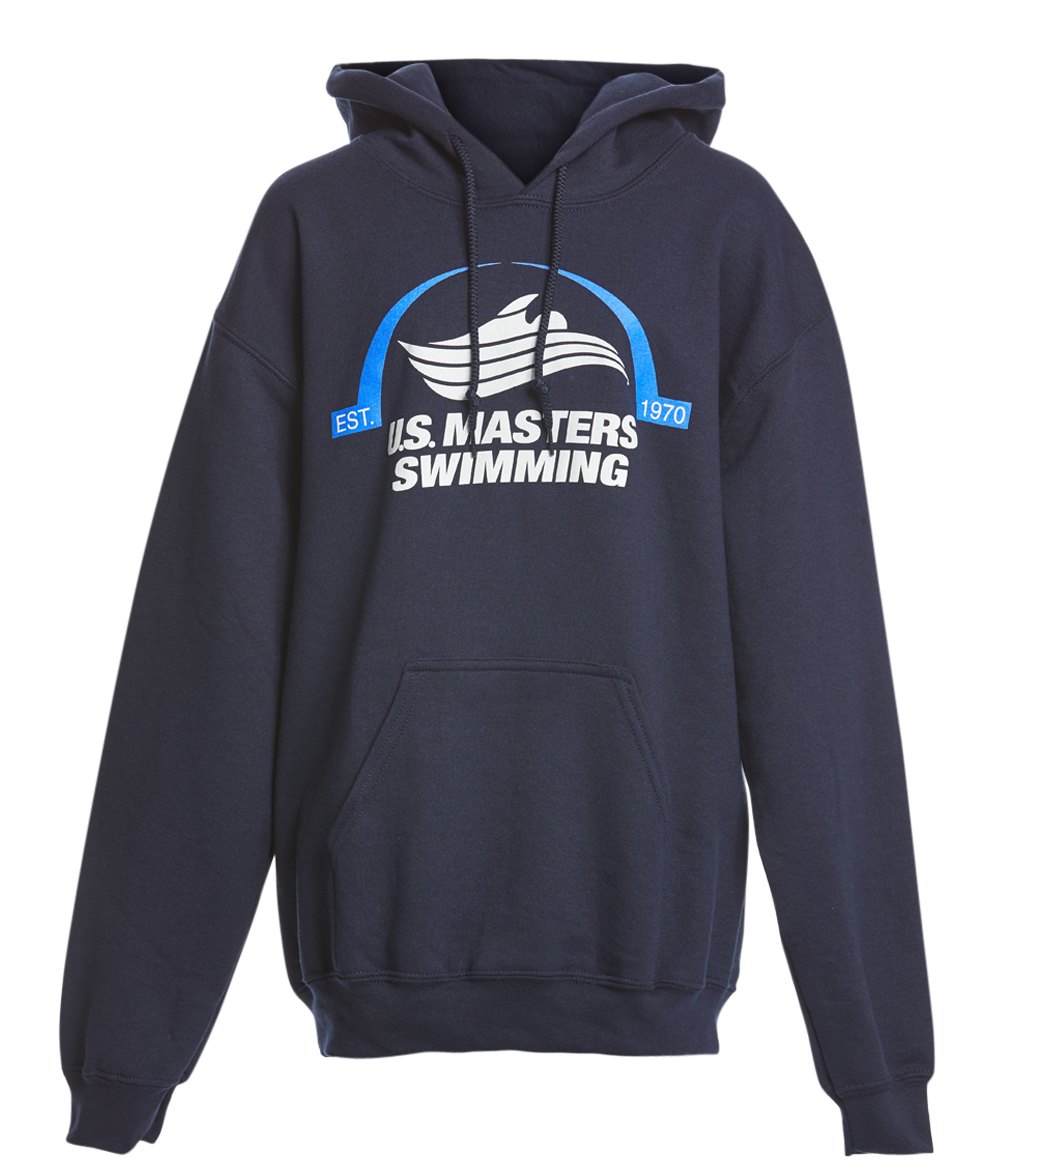 U.s. Masters Swimming Usms Classic Hooded Sweatshirt - Navy Medium Cotton/Cotton/Polyester/Polyester - Swimoutlet.com